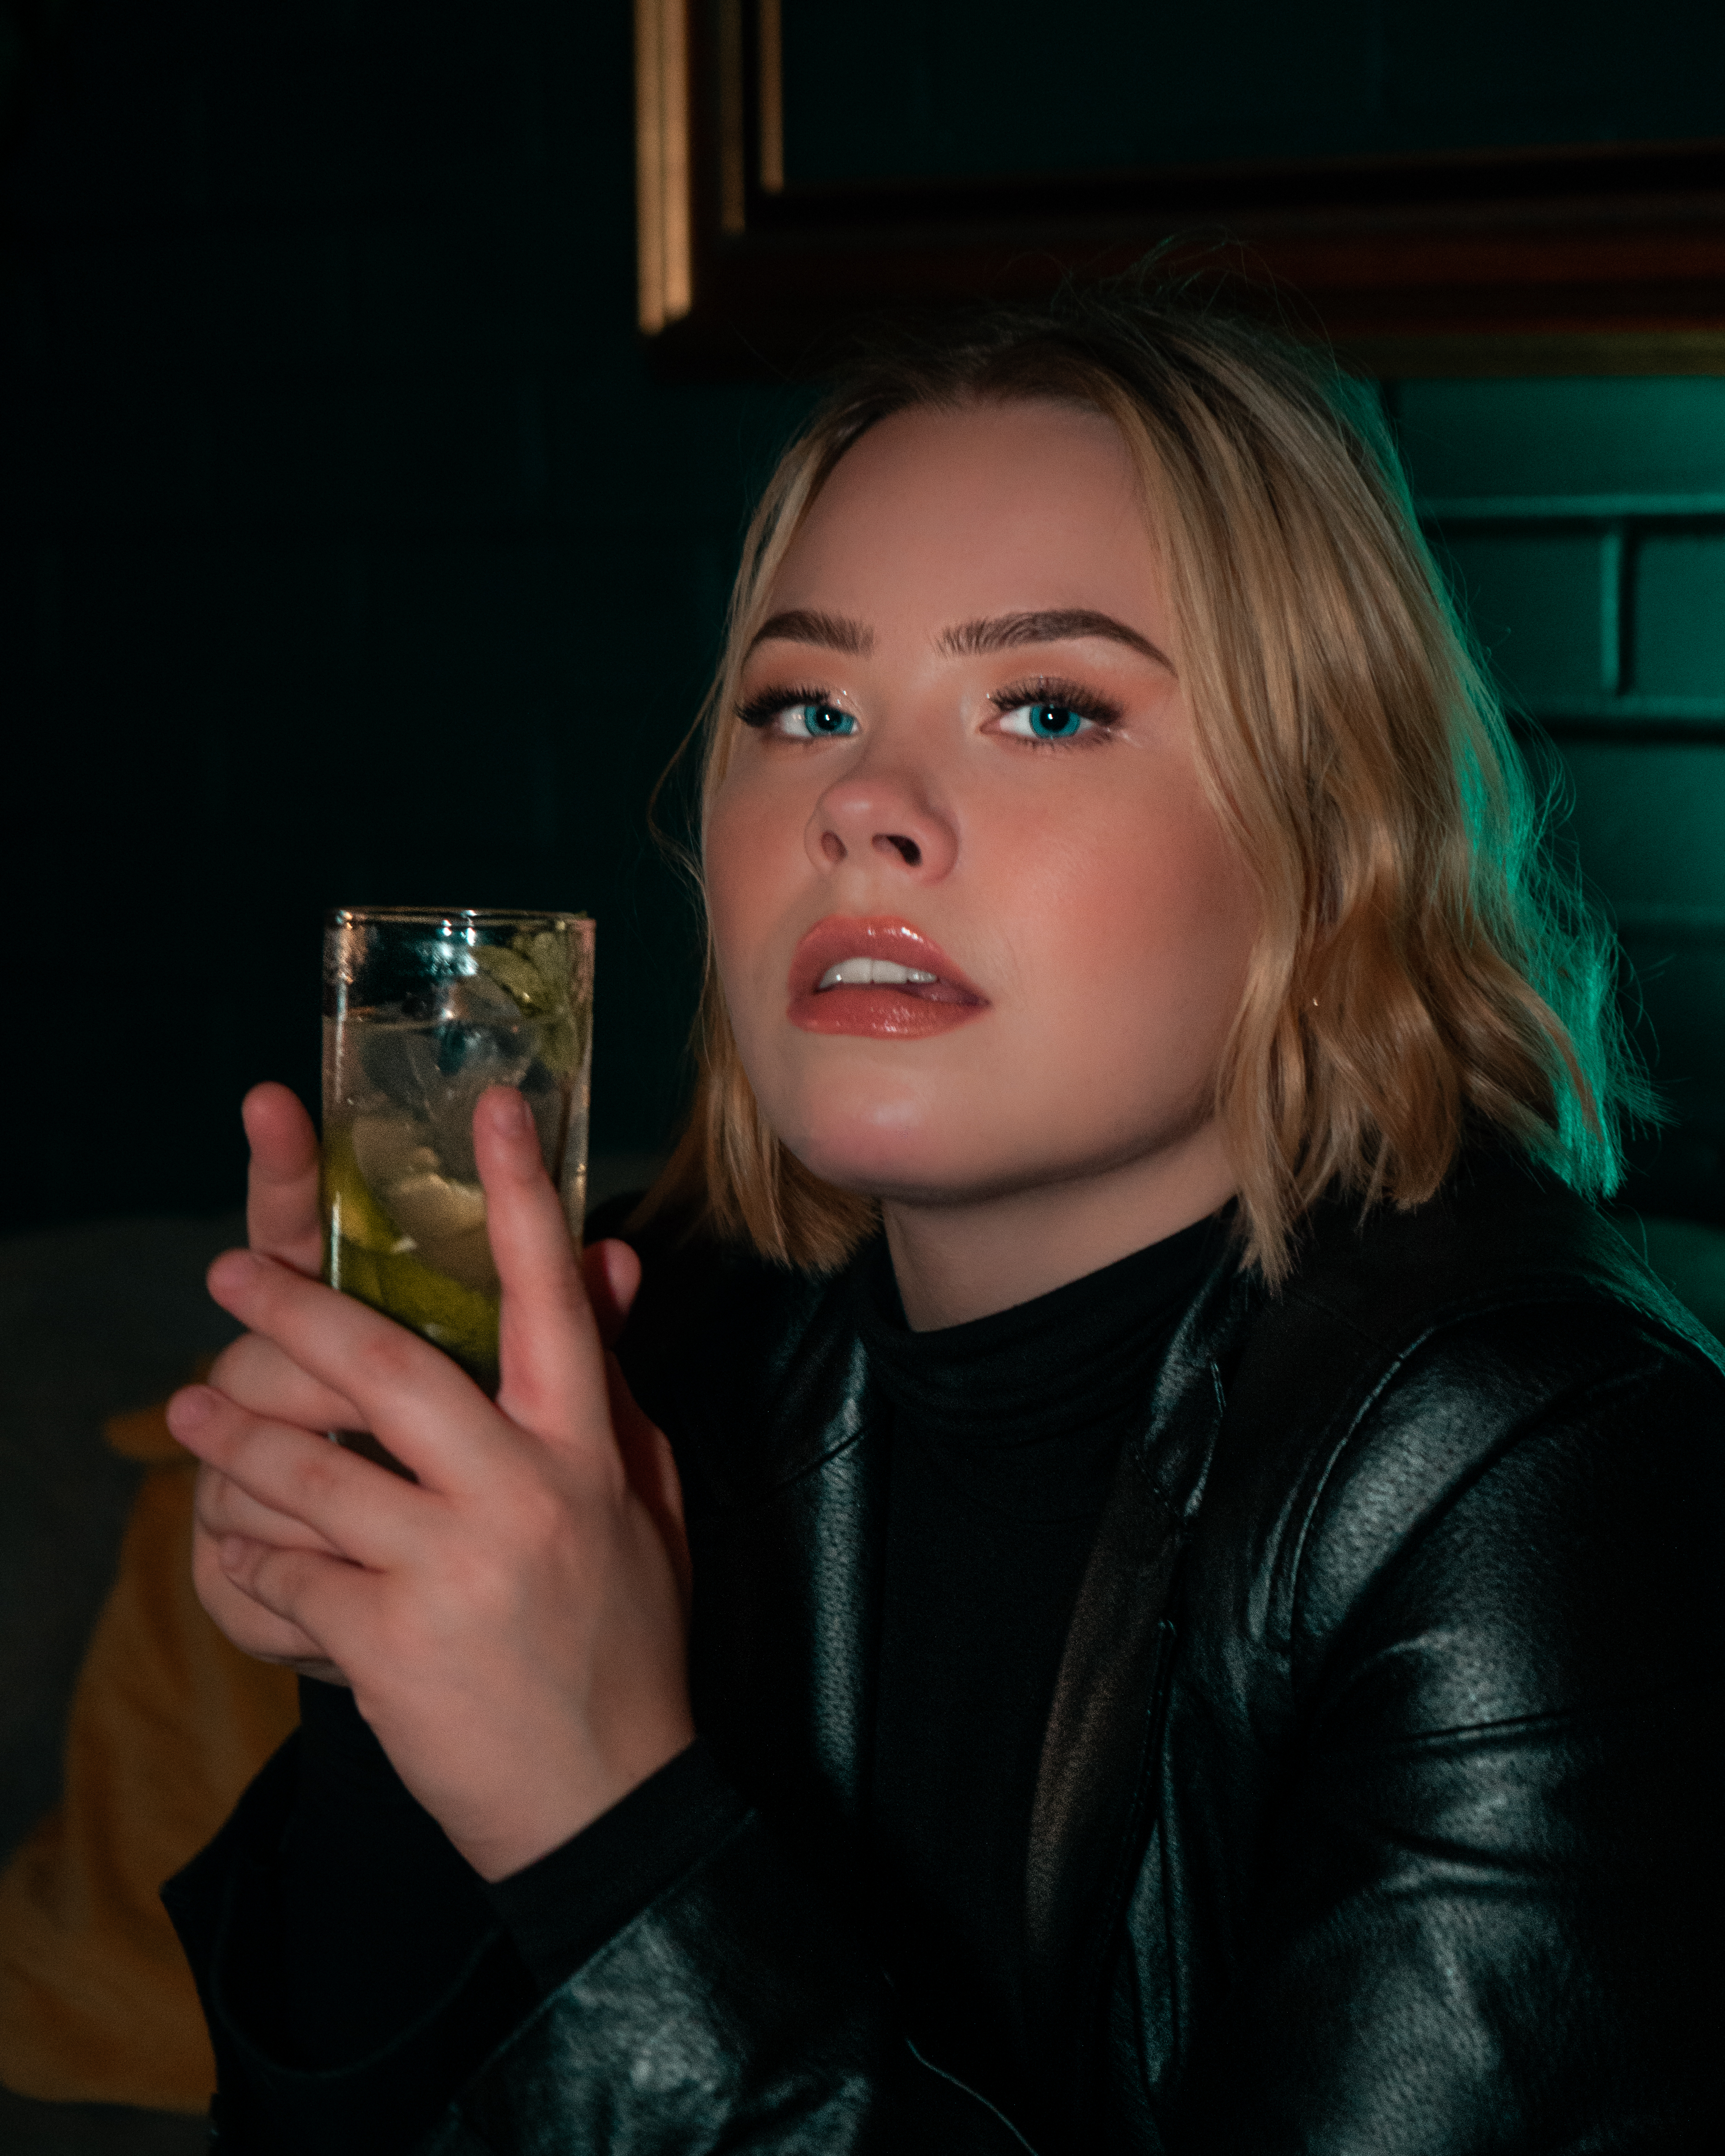 Blonde woman with blue eyes is wearing a leather jacket and holding a Moscow mule drink in her hand. She is smiling while she is sitting in a bar on a sofa.